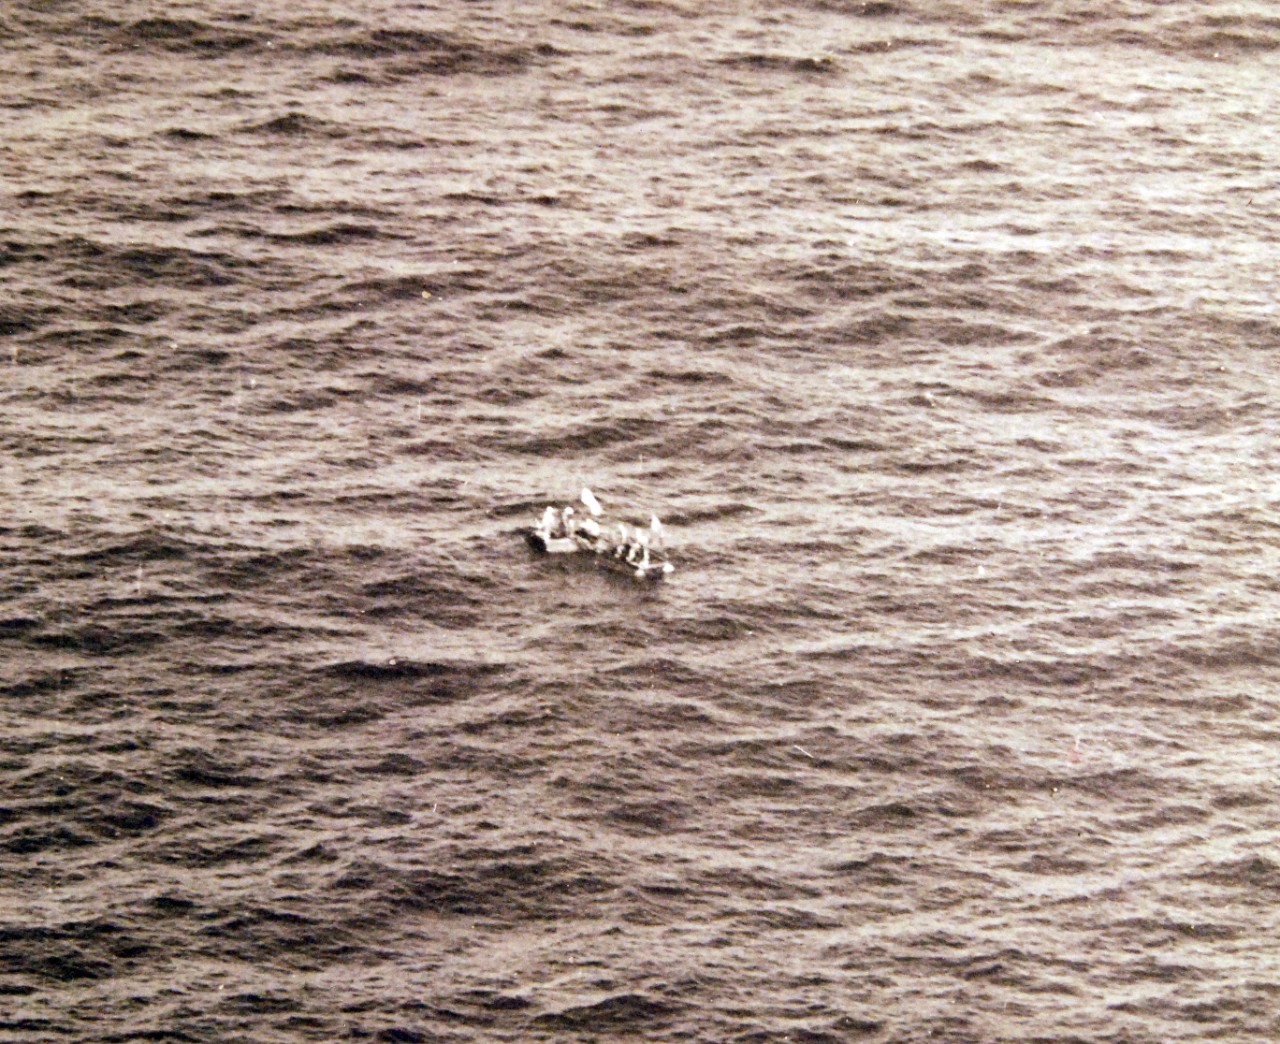 <p>80-G-61538: German U-boat attacks, WWII. Aerial of survivors on rafts from SS Delvalle sunk by German U-boat off the Southern coast of Haiti, April 12, 1942.&nbsp;</p>
